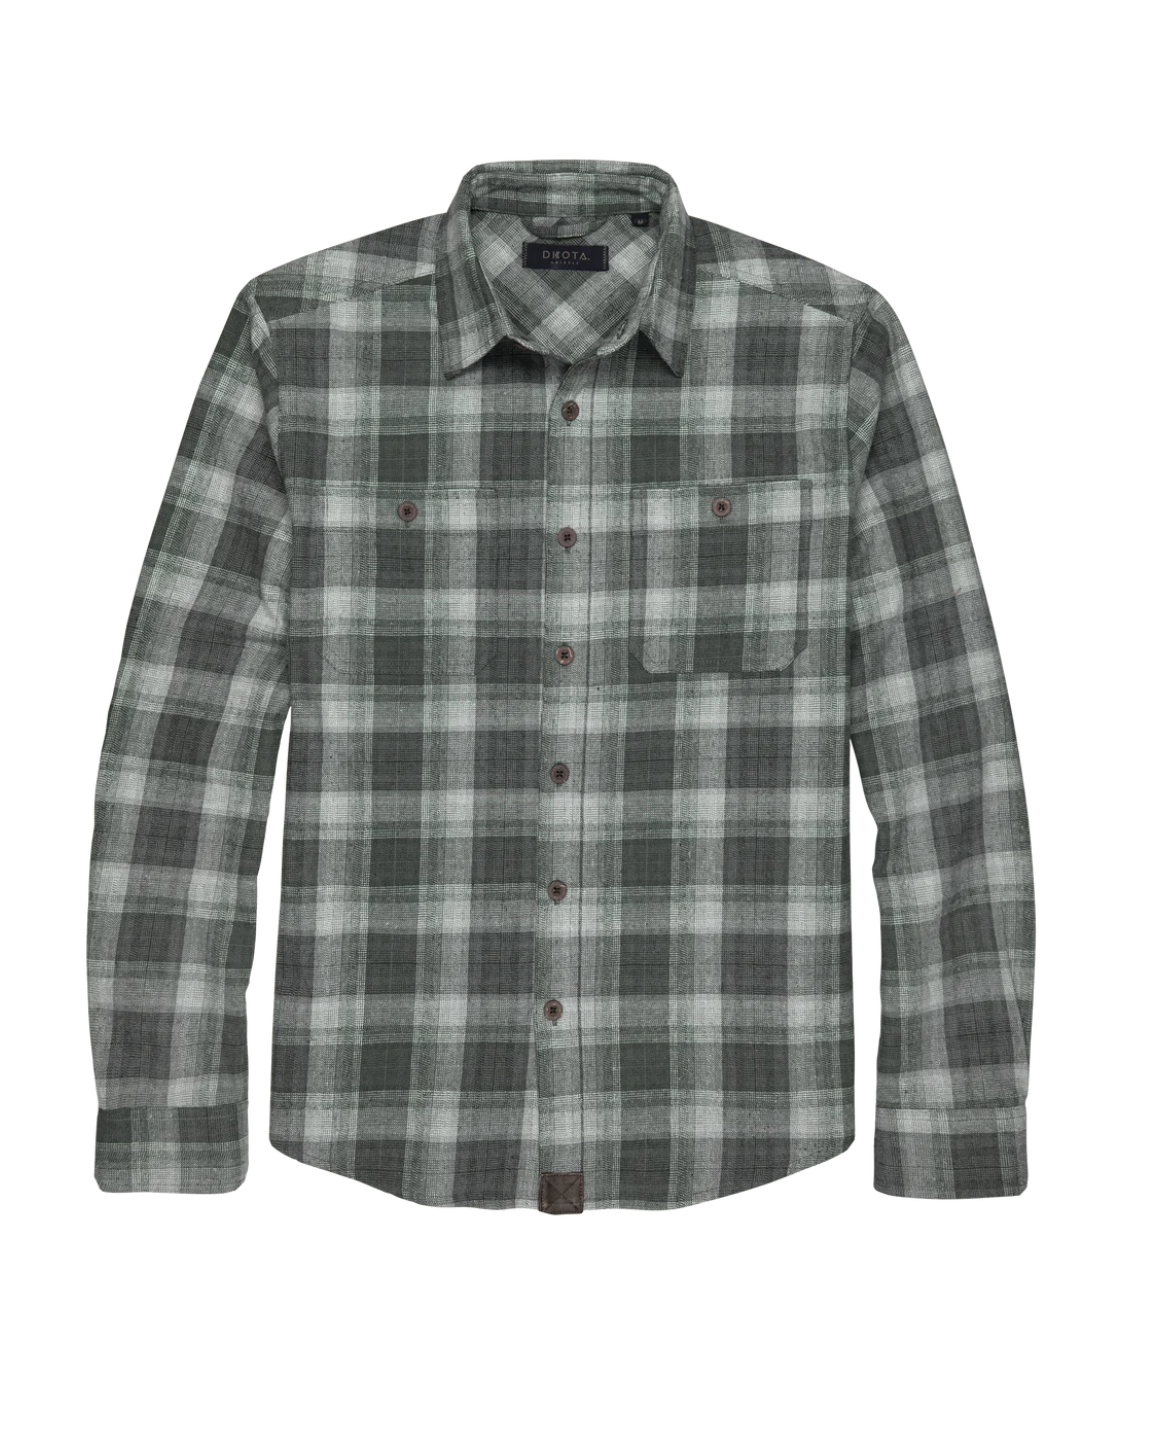 Dakota Grizzly Grant Button Up in Green Shale